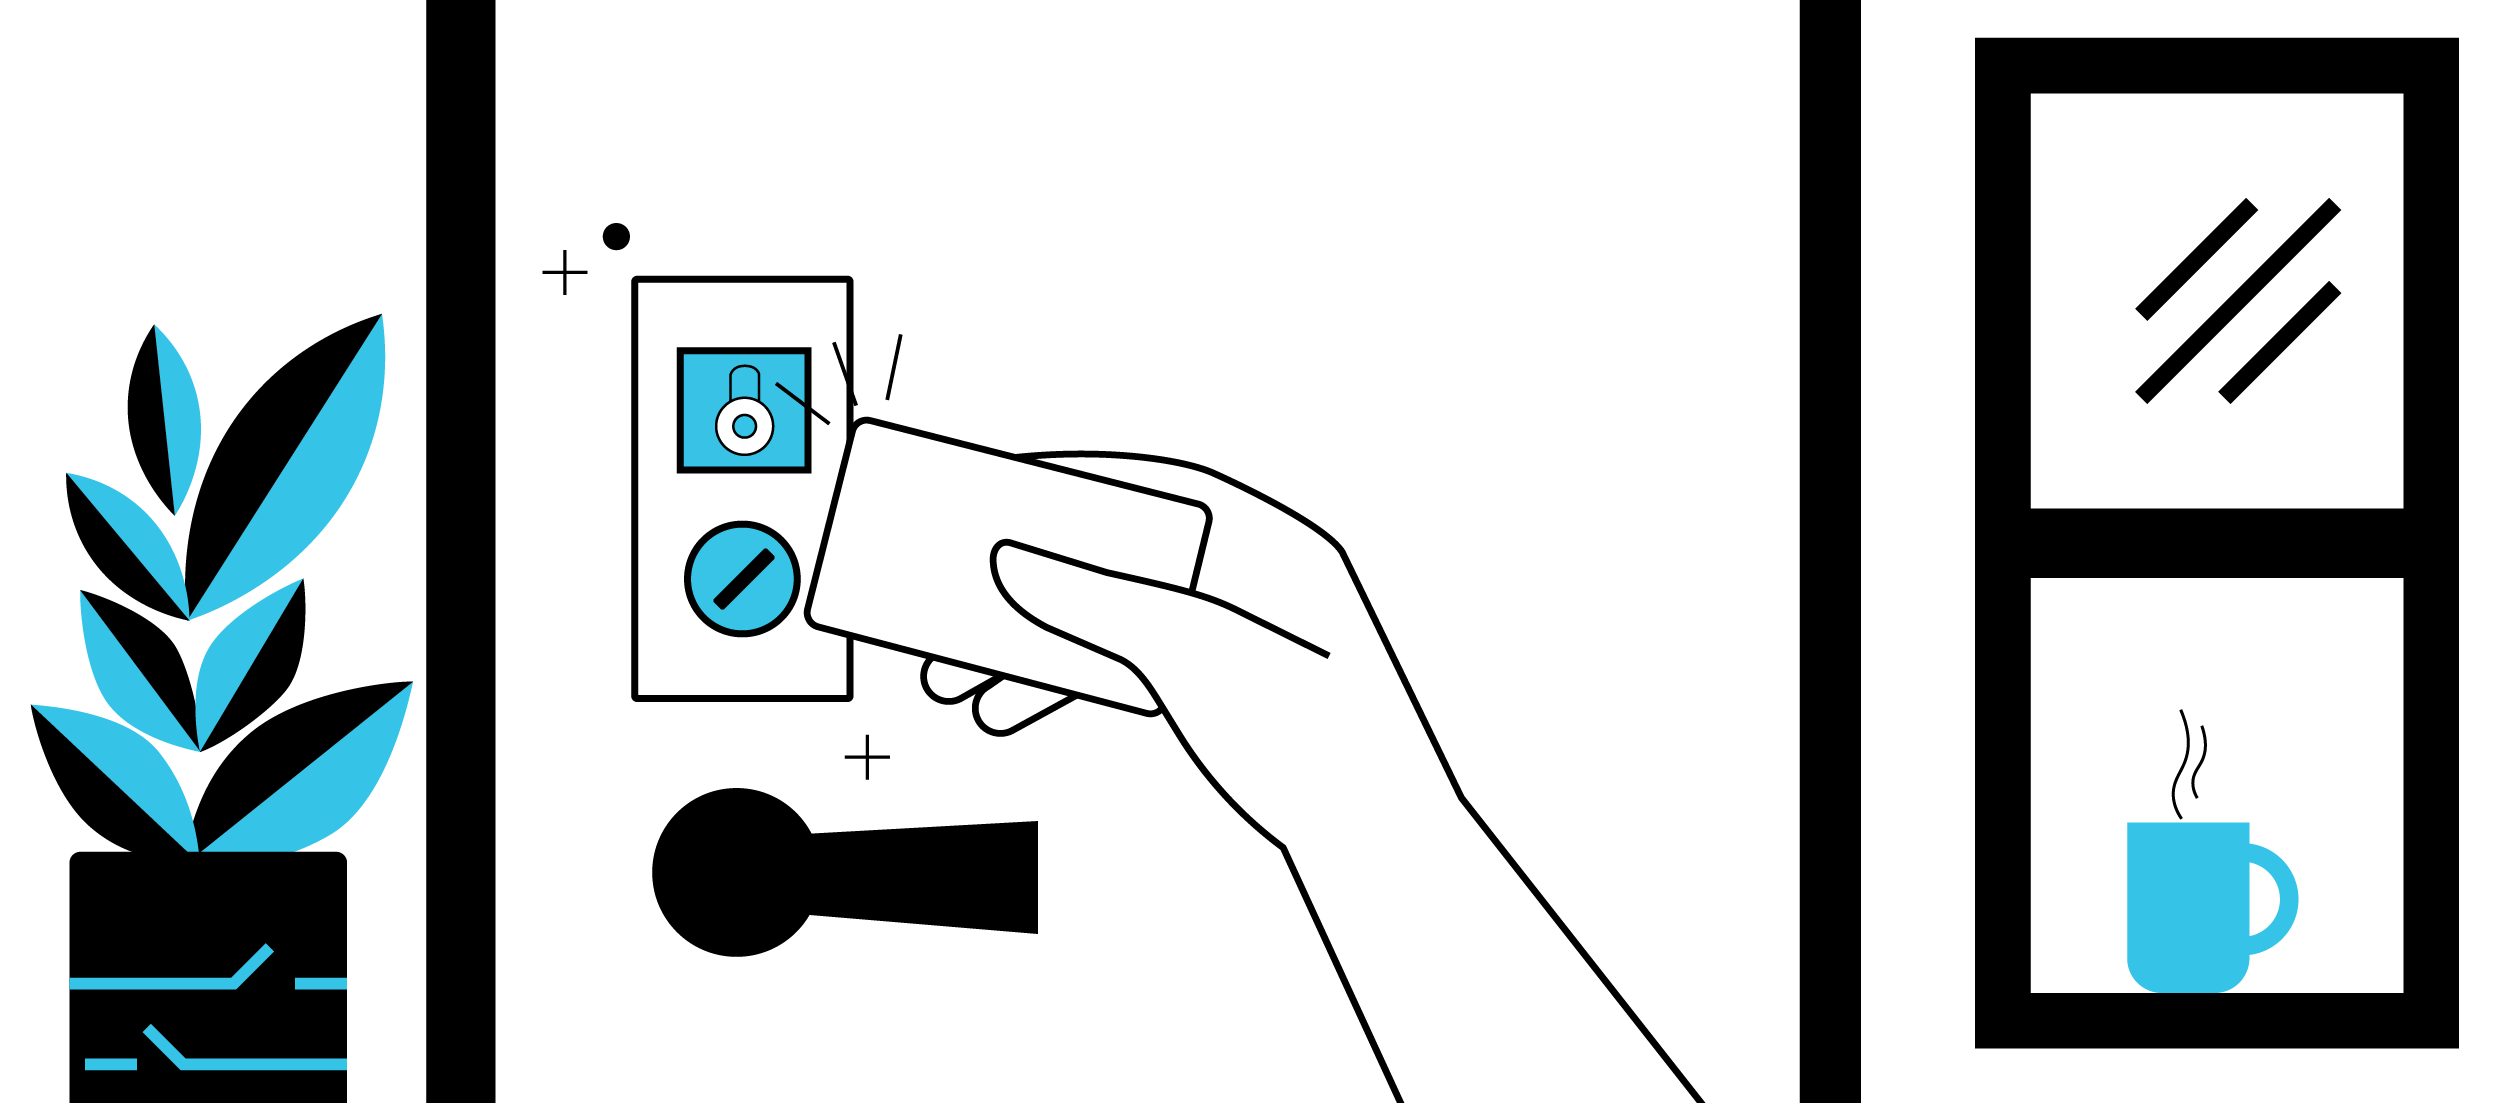 An illustration of a resident using their smart lock.